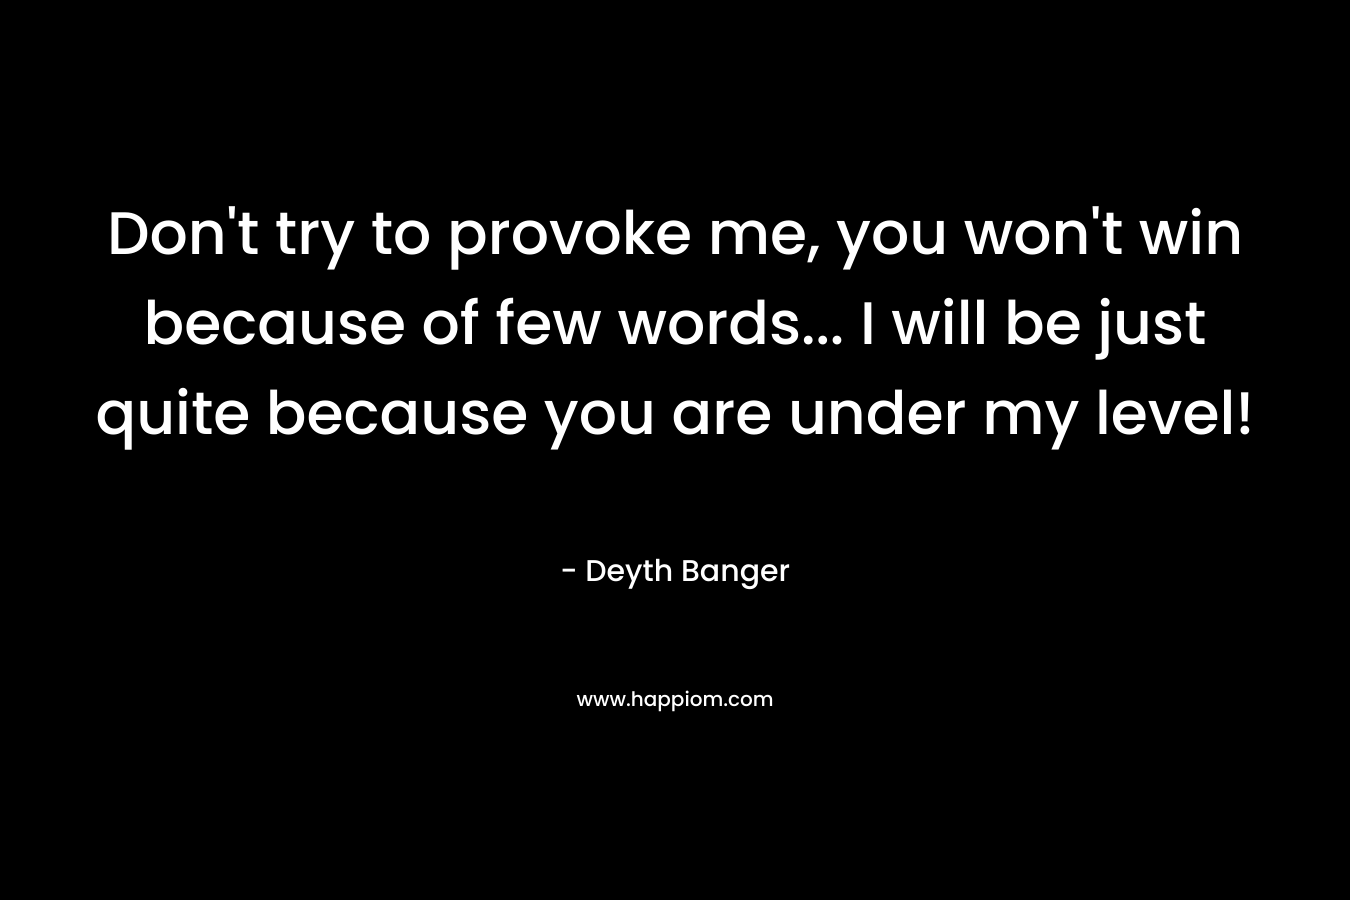 Don't try to provoke me, you won't win because of few words... I will be just quite because you are under my level!